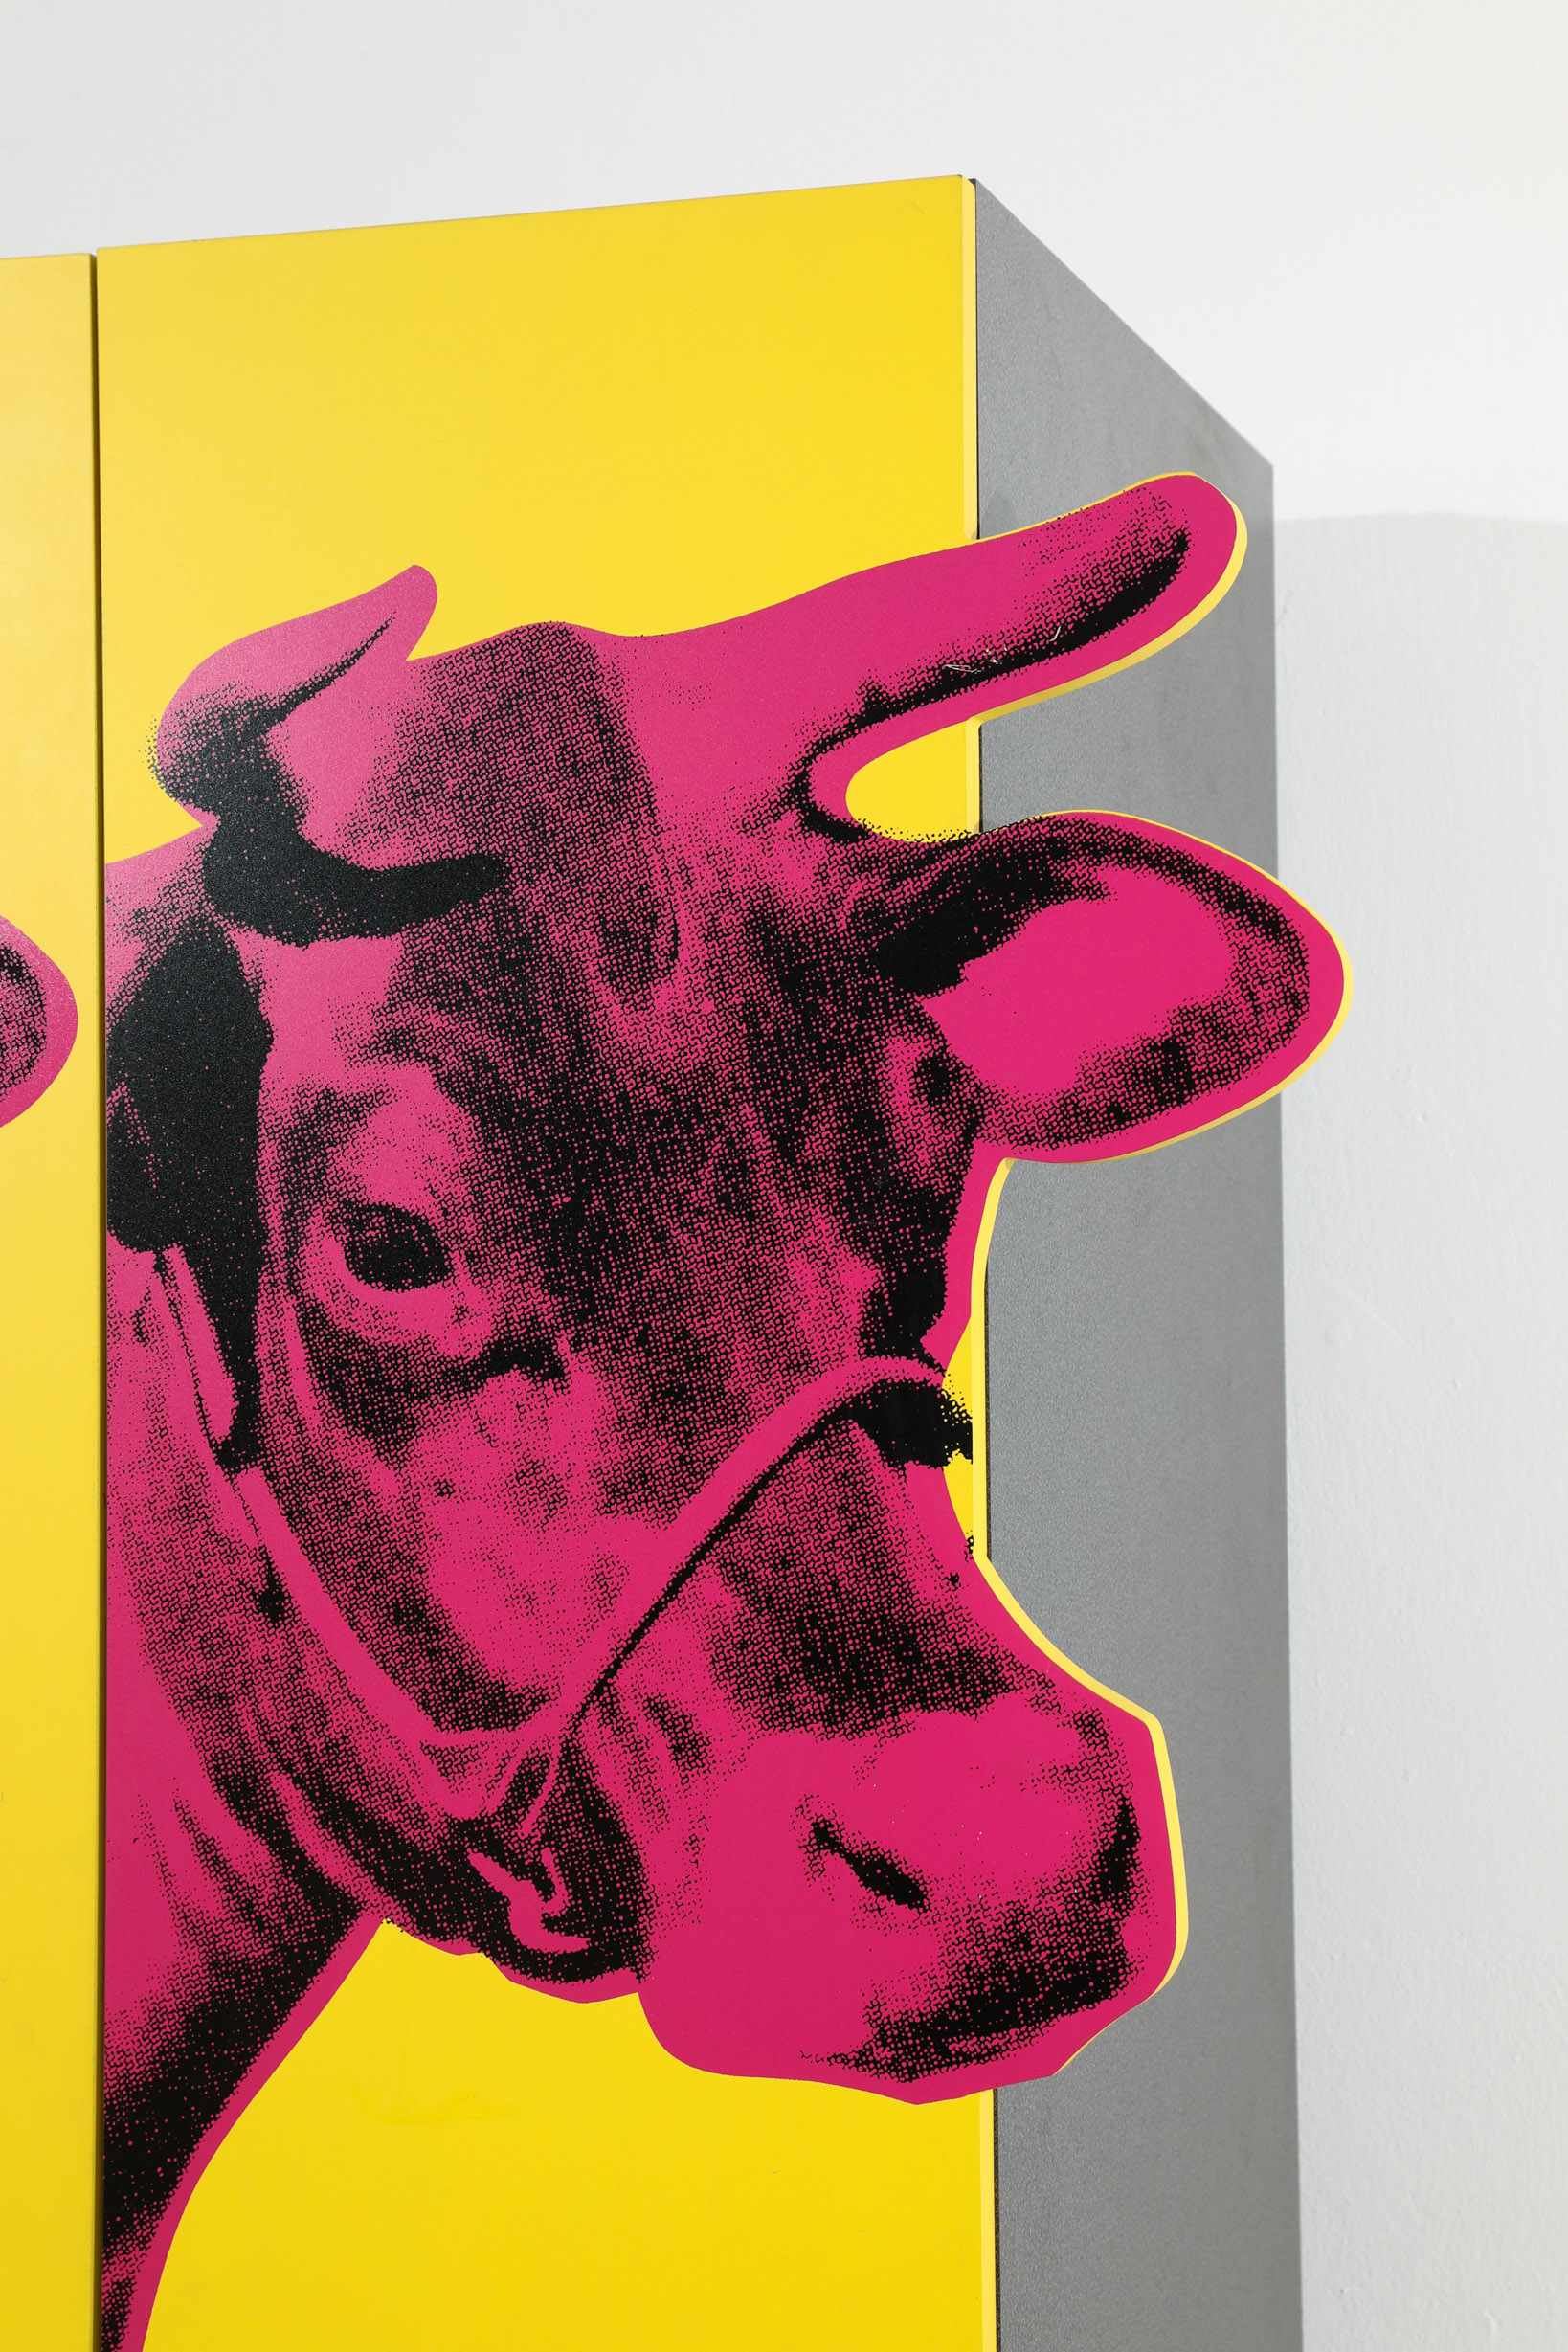 Andy Warhol, hb Collection, limited Cabinet with the Cow Wallpaper motif - Image 4 of 9